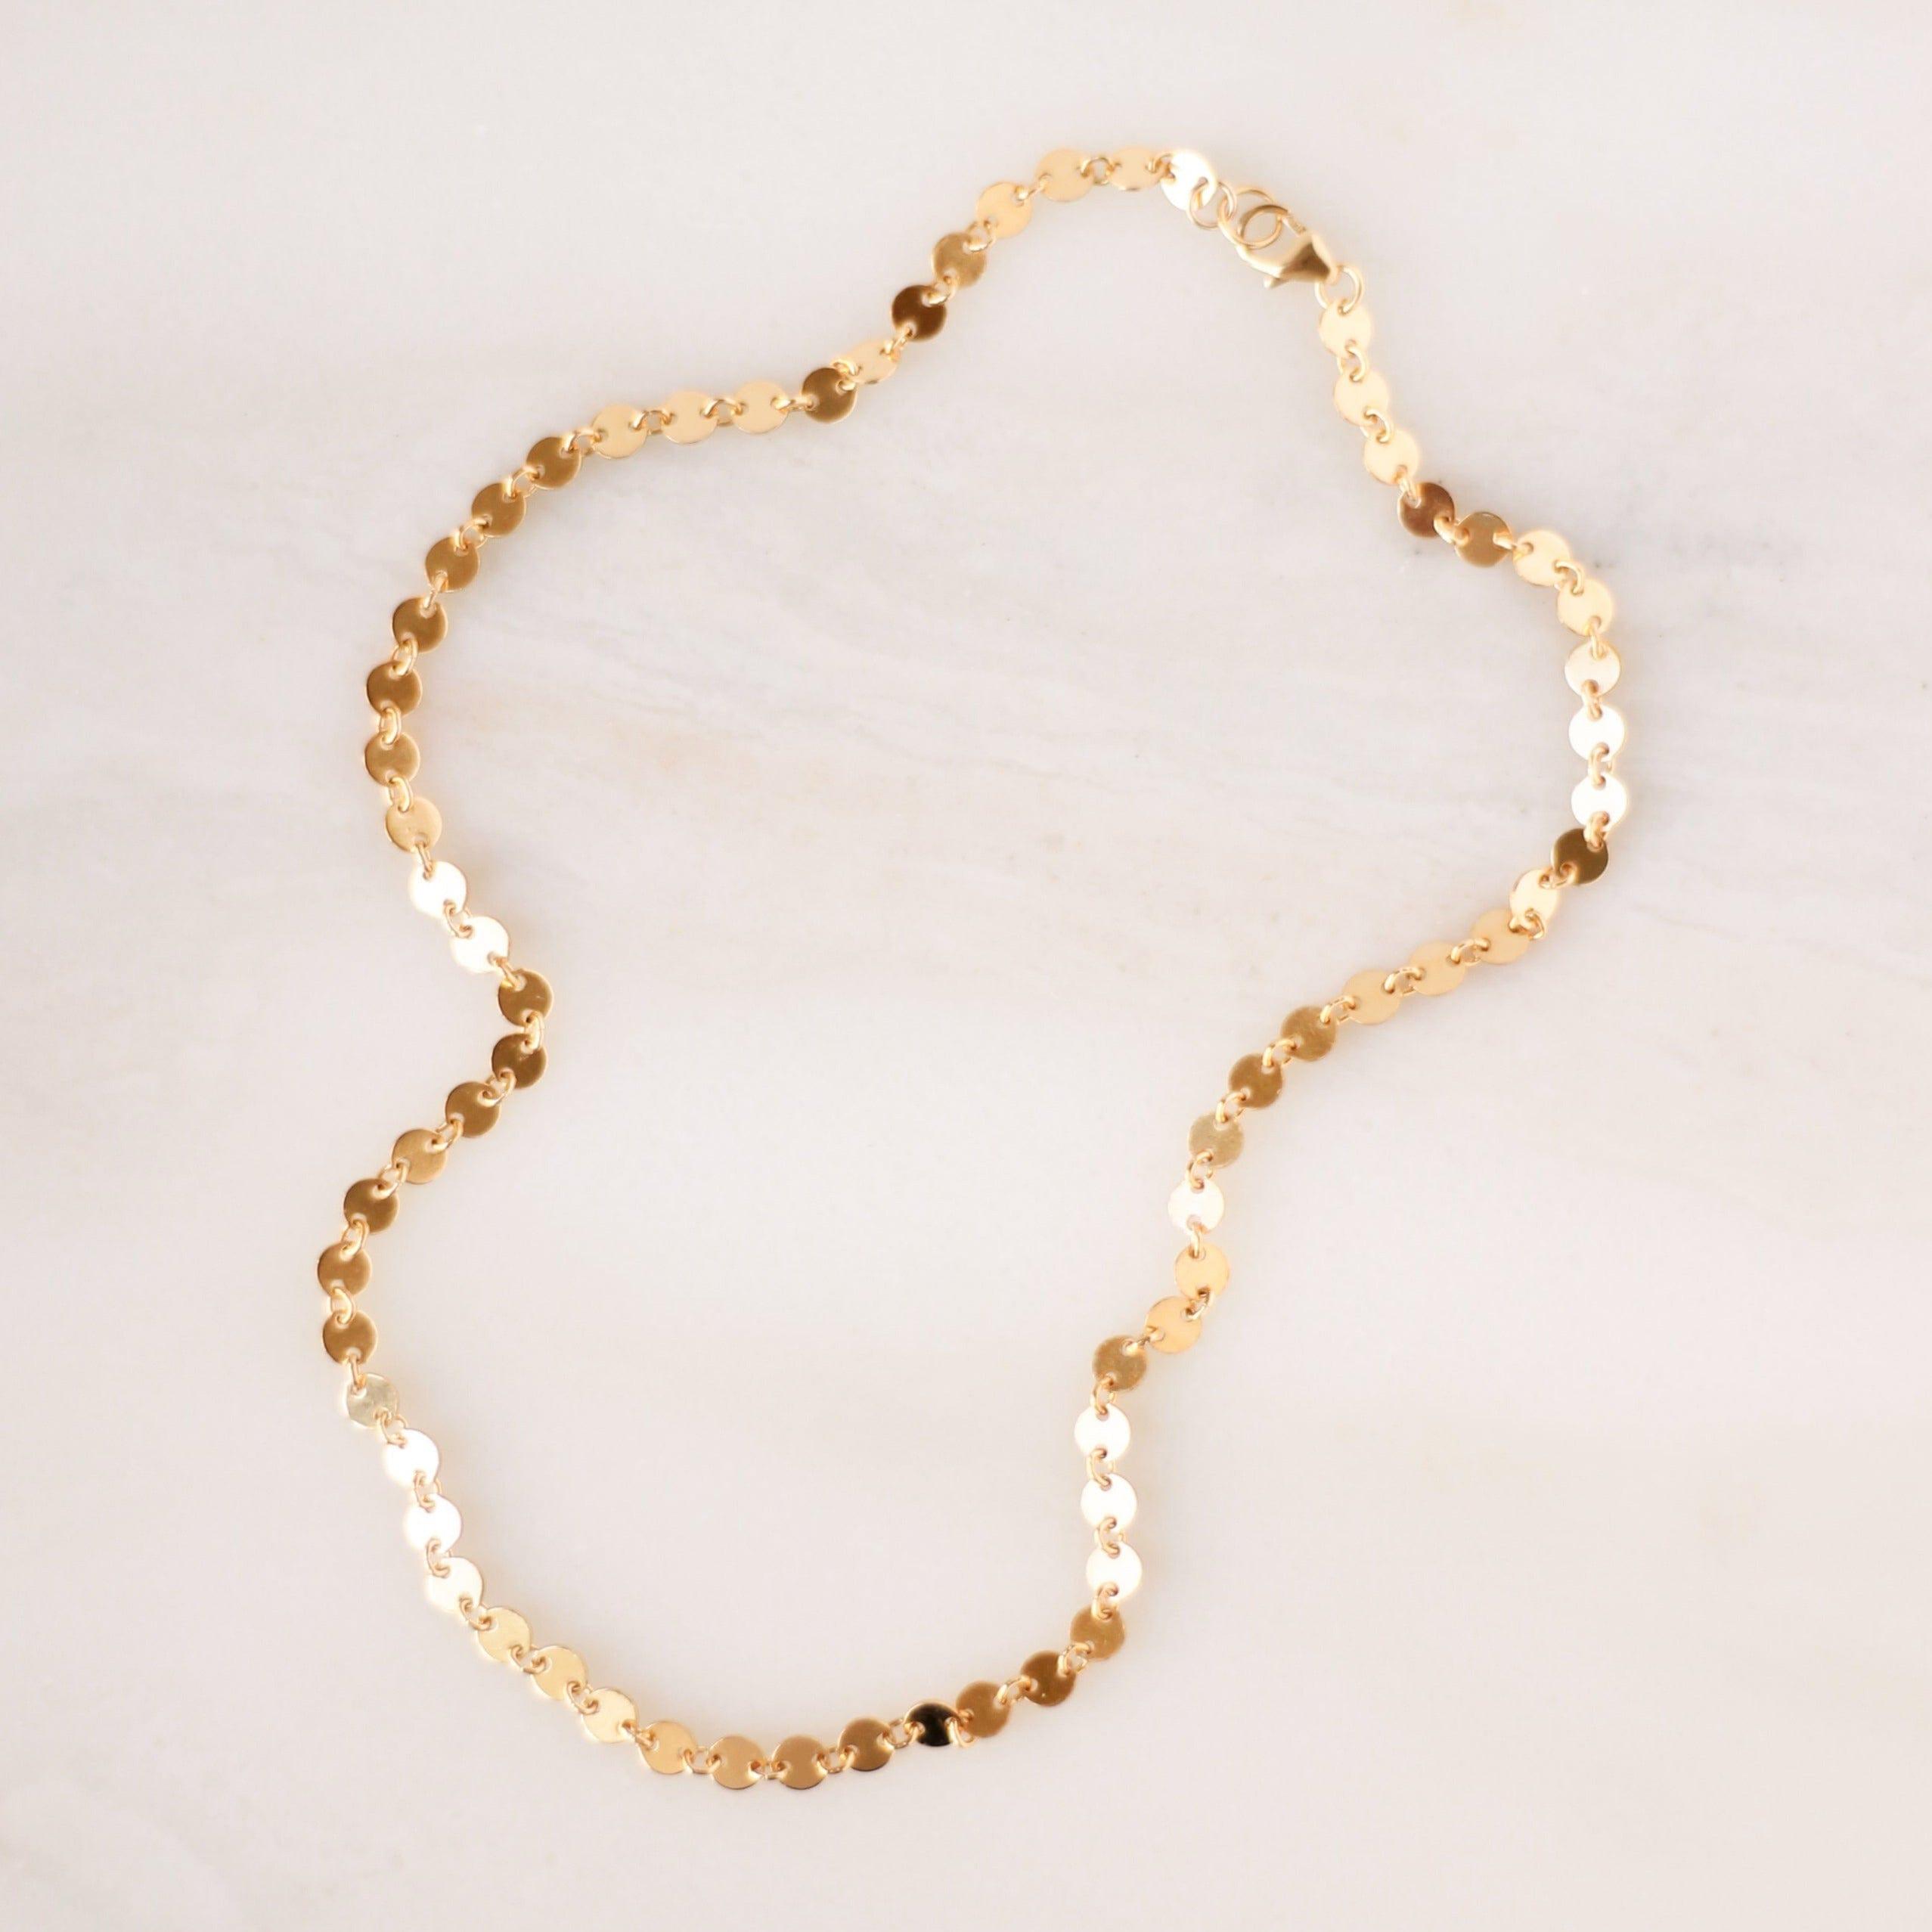 Sequin Chain Necklace - Nolia Jewelry - Meaningful + Sustainably Handcrafted Jewelry